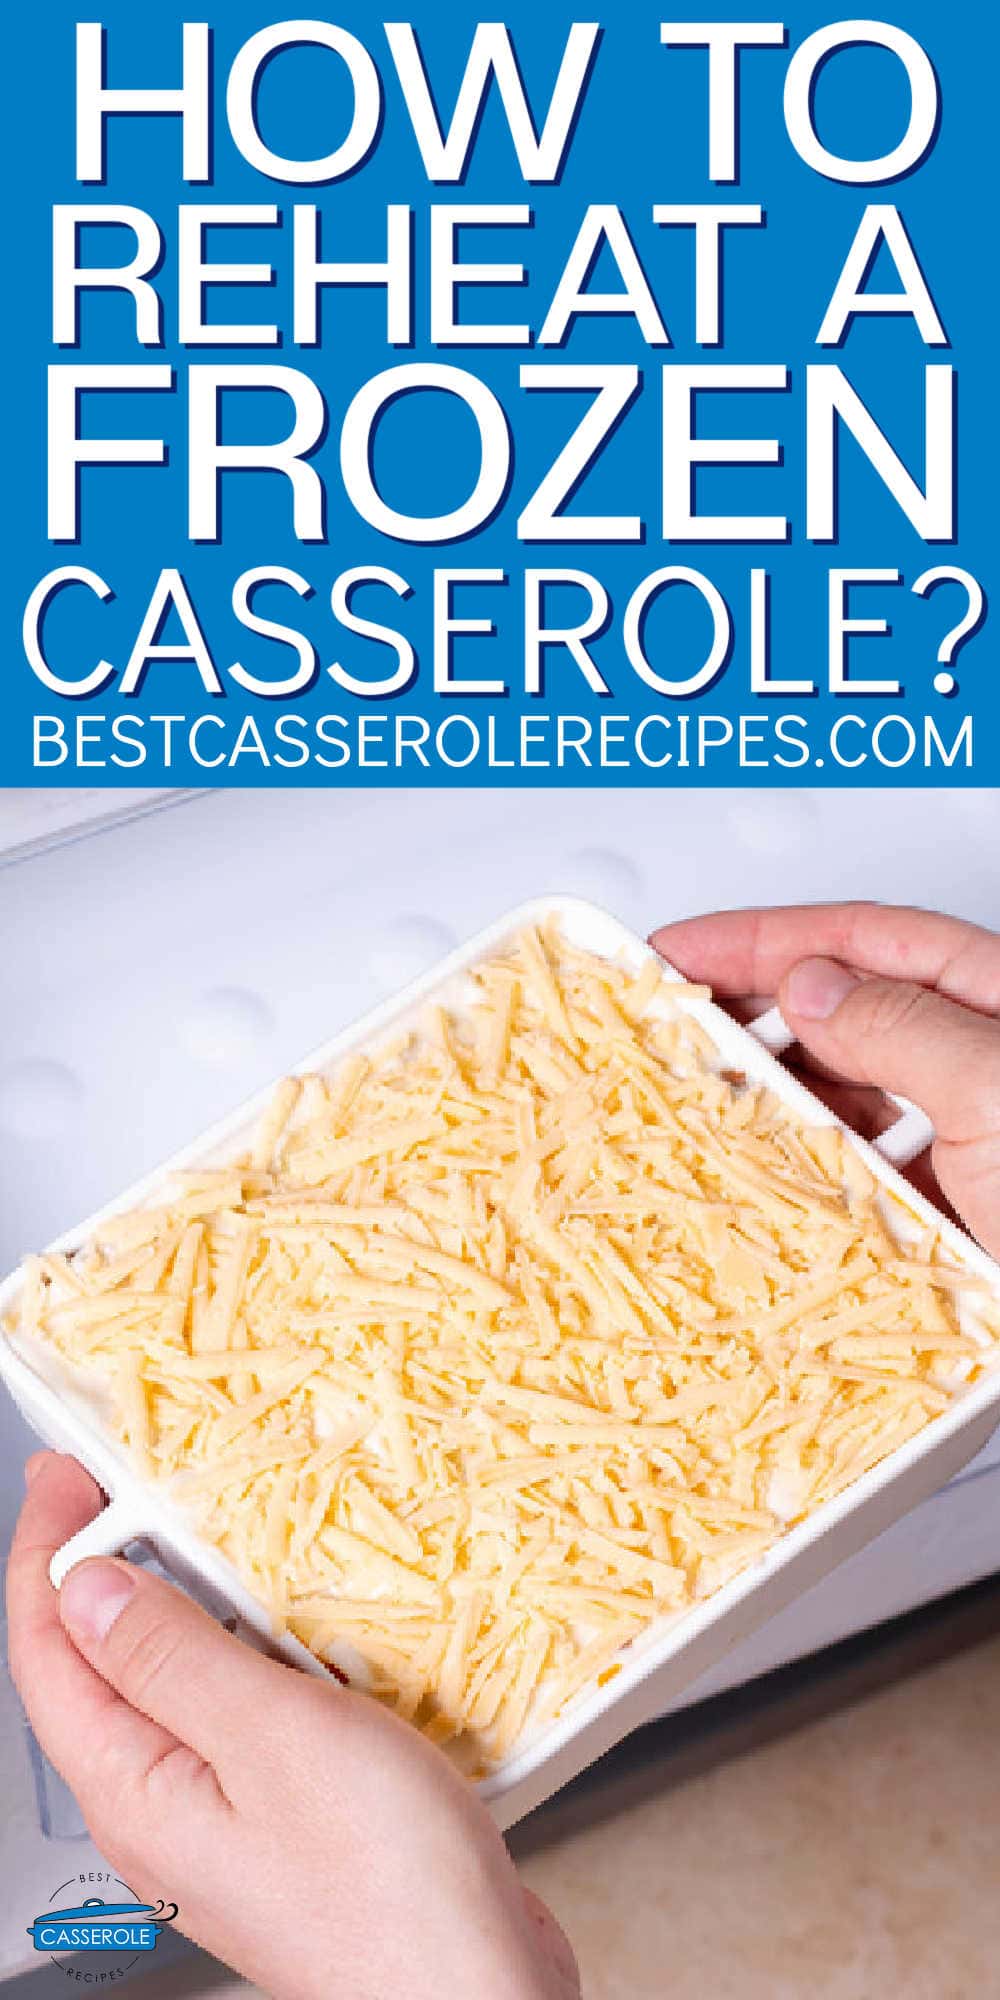 casserole dish with two hands over a freezer drawer with text "how to reheat a frozen casserole"